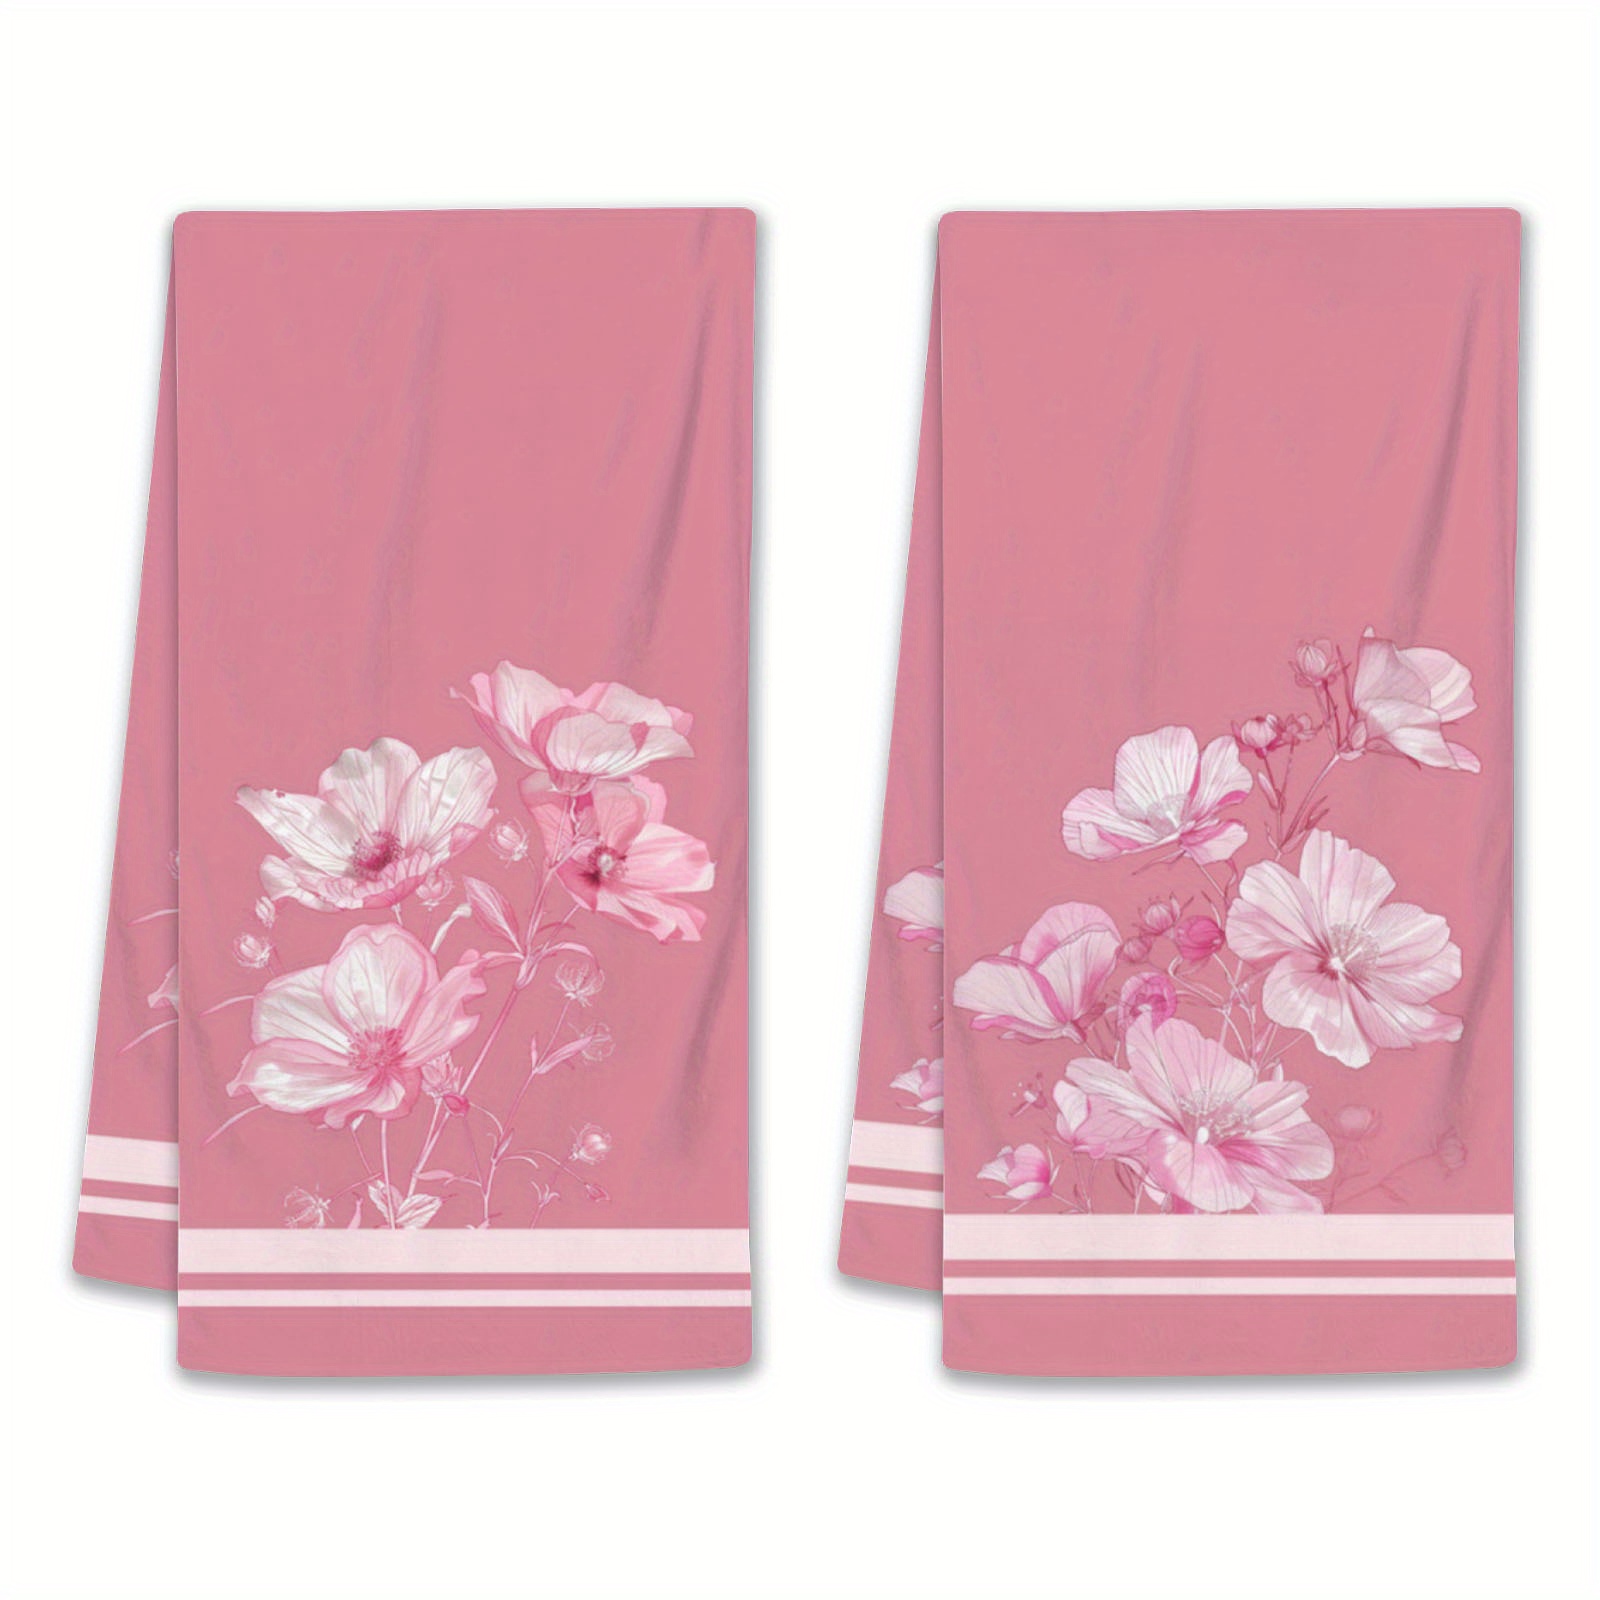 

2-pack Cherry Hand Towels - Soft & Absorbent Polyester, Pink Floral Design For Bathroom & Kitchen, Decorative , 18x26 Inches